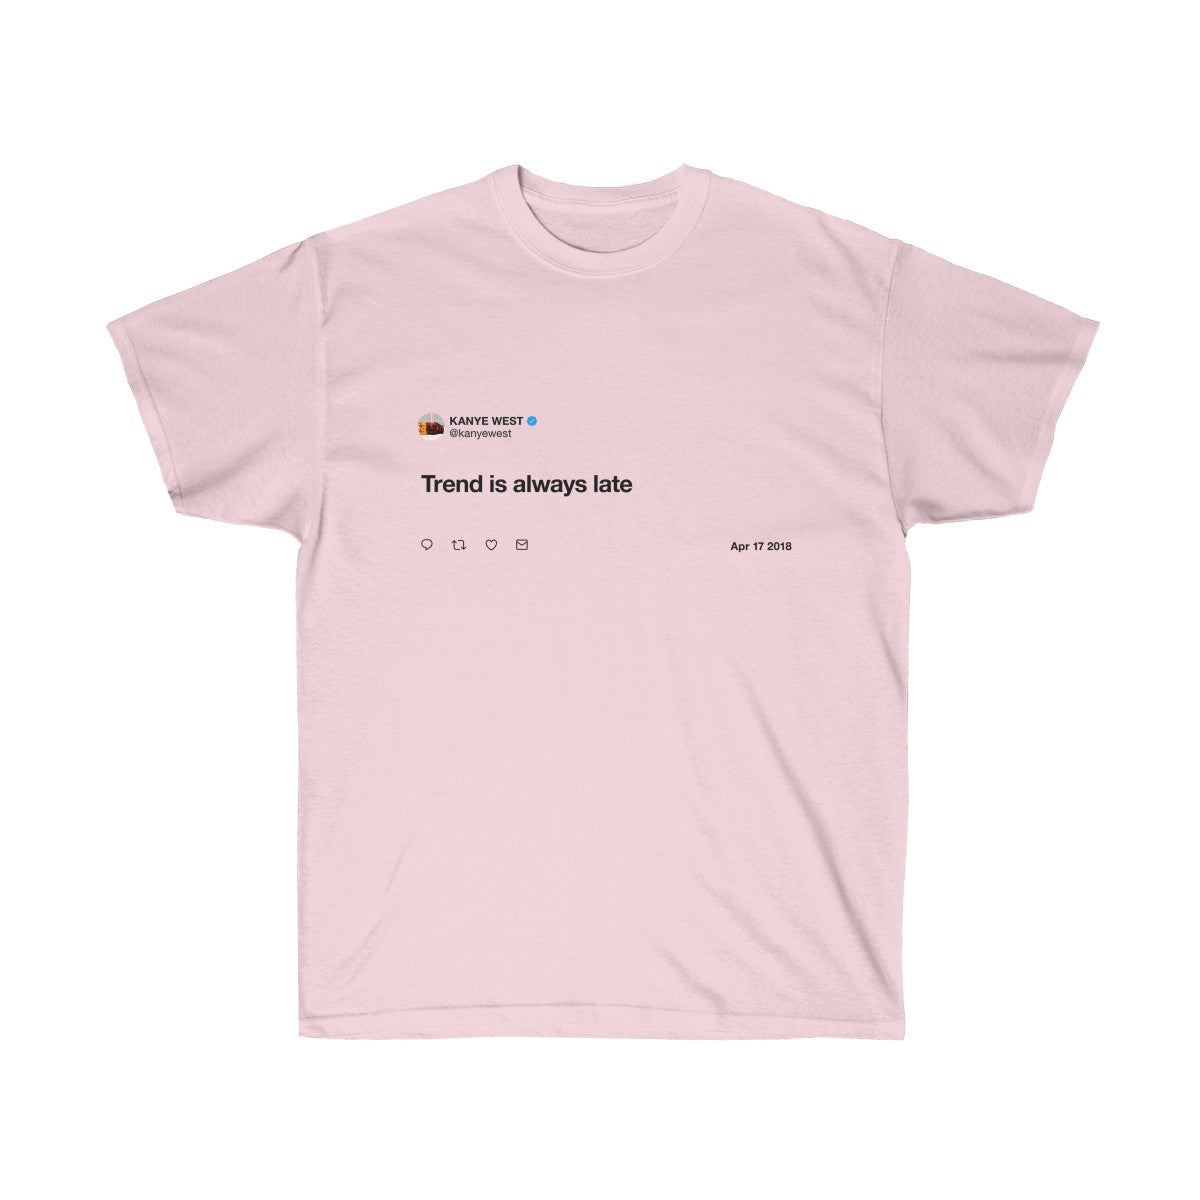 Trend is always late - Kanye West T-Shirt-Light Pink-S-Archethype